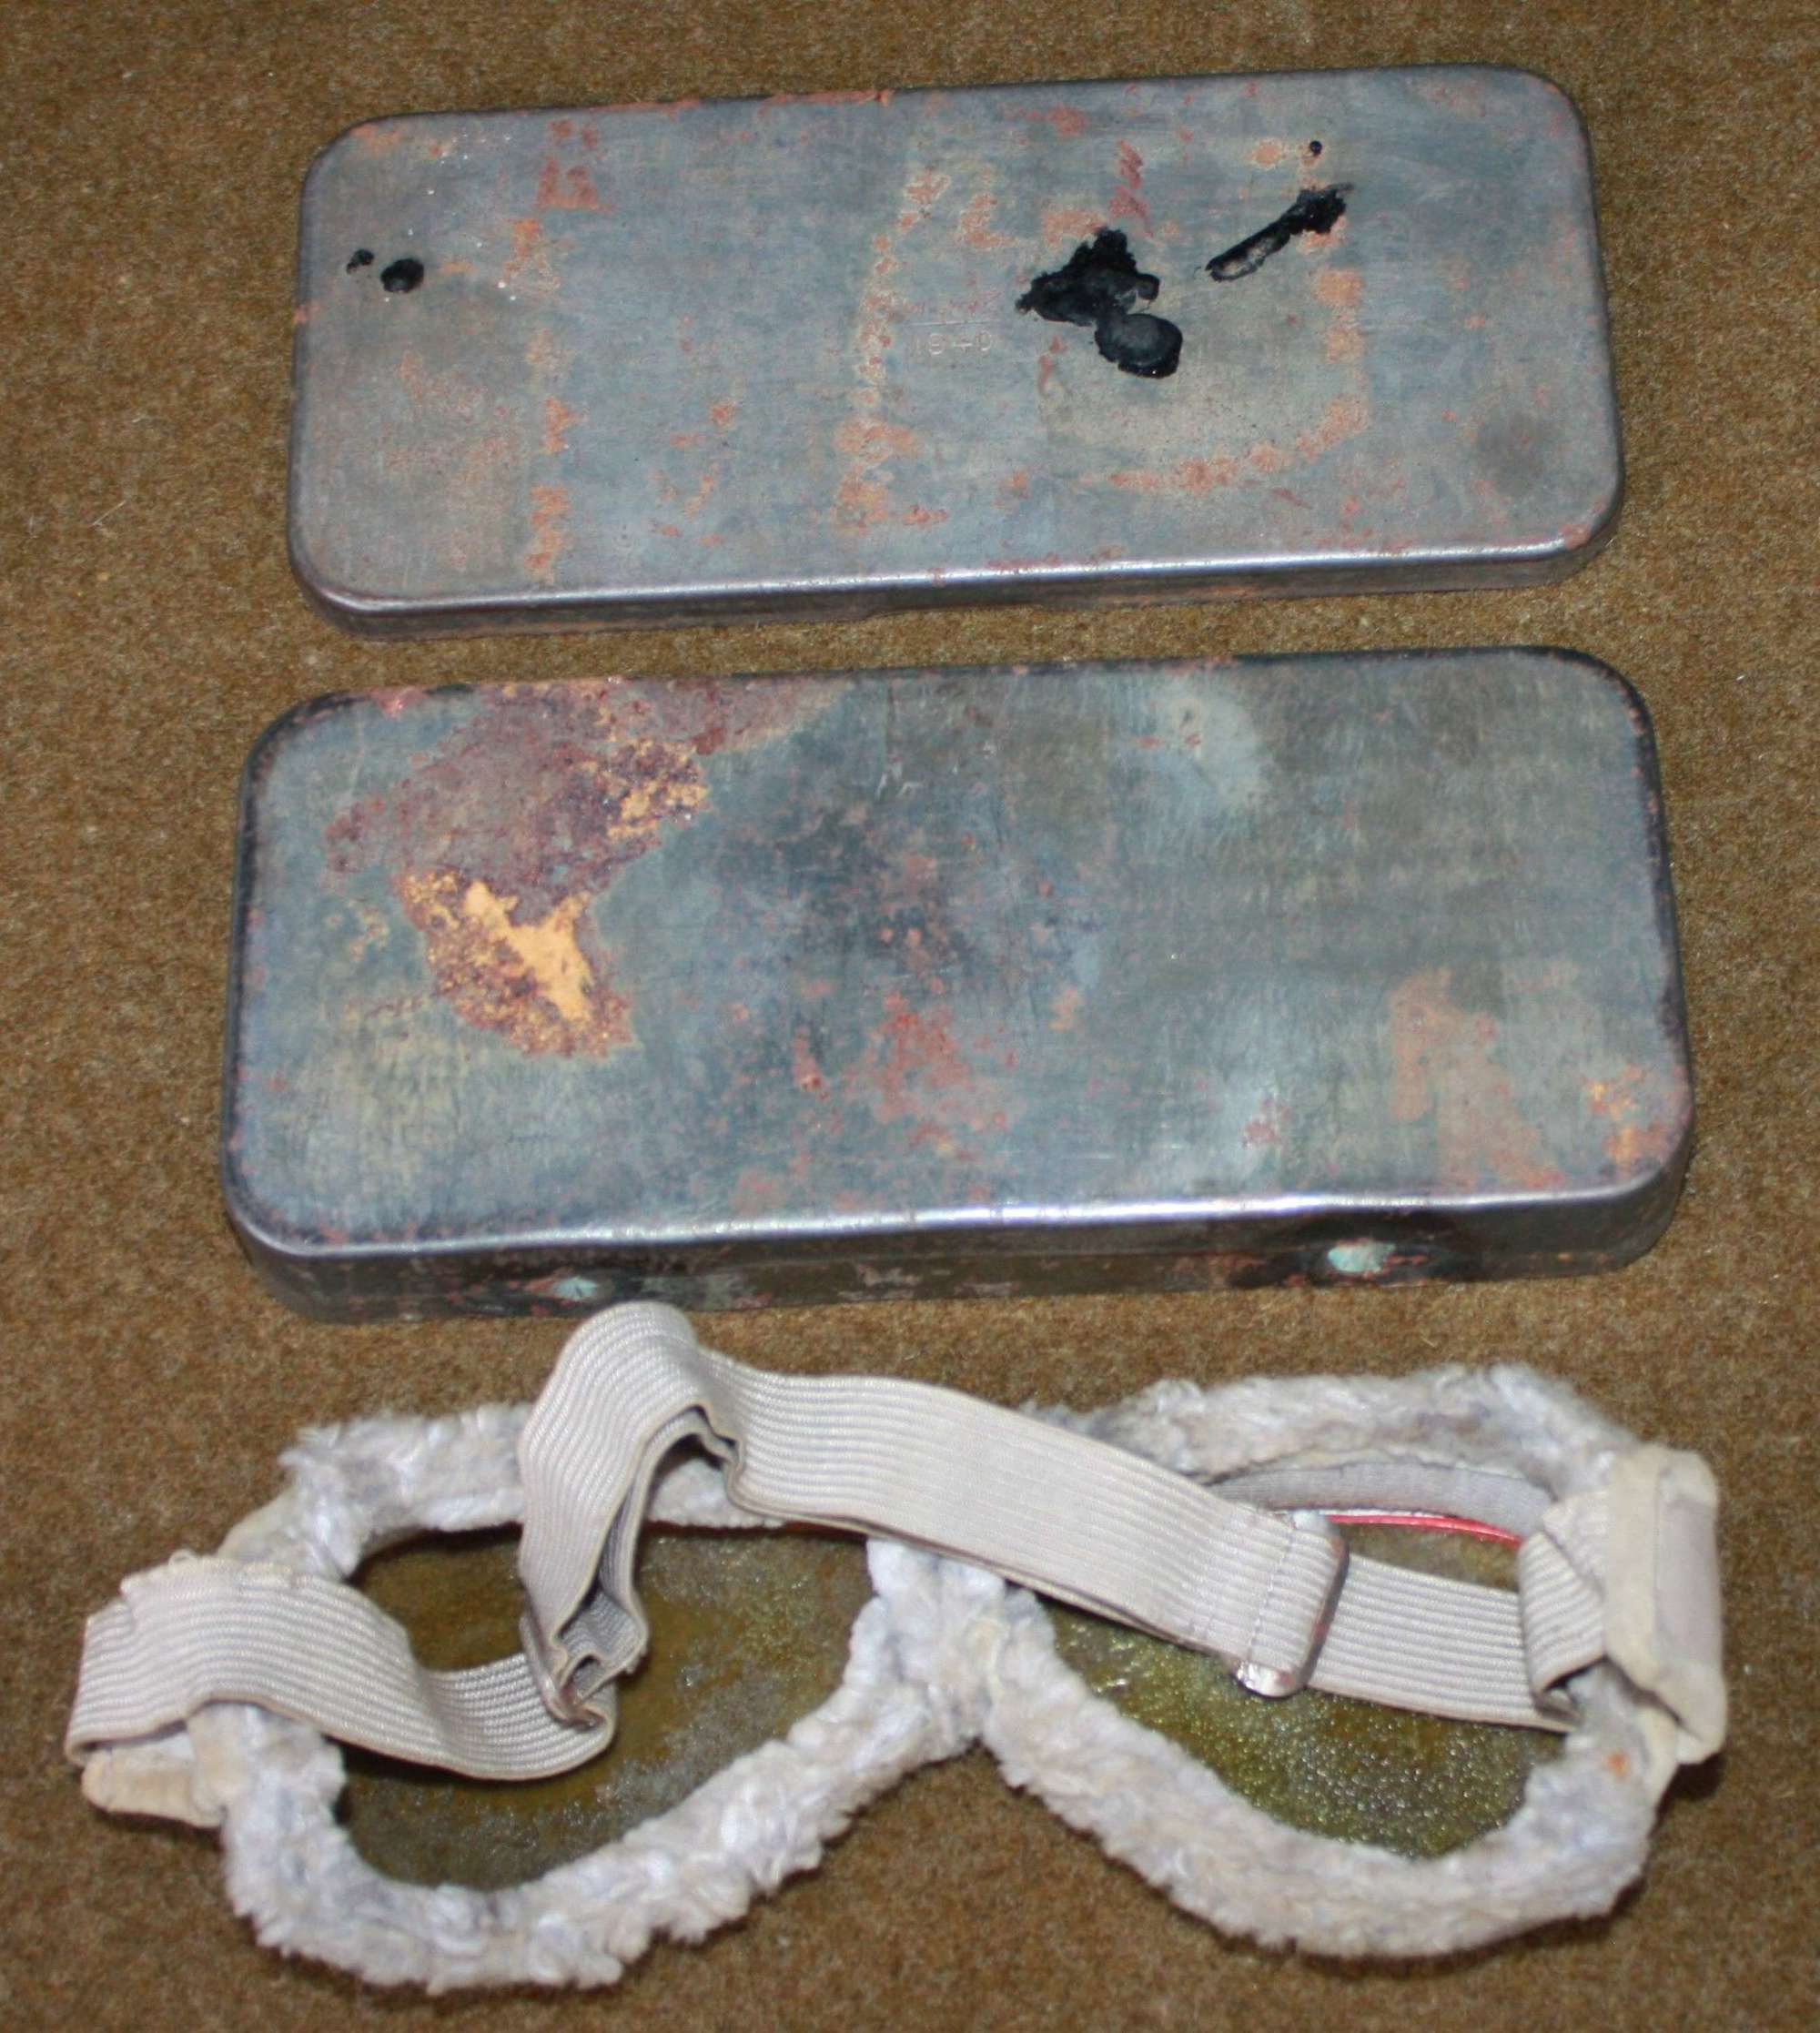 A PAIR OF EALRY WAR GOGGLES IN THERE TIN IMPORTANT  SEE PICS